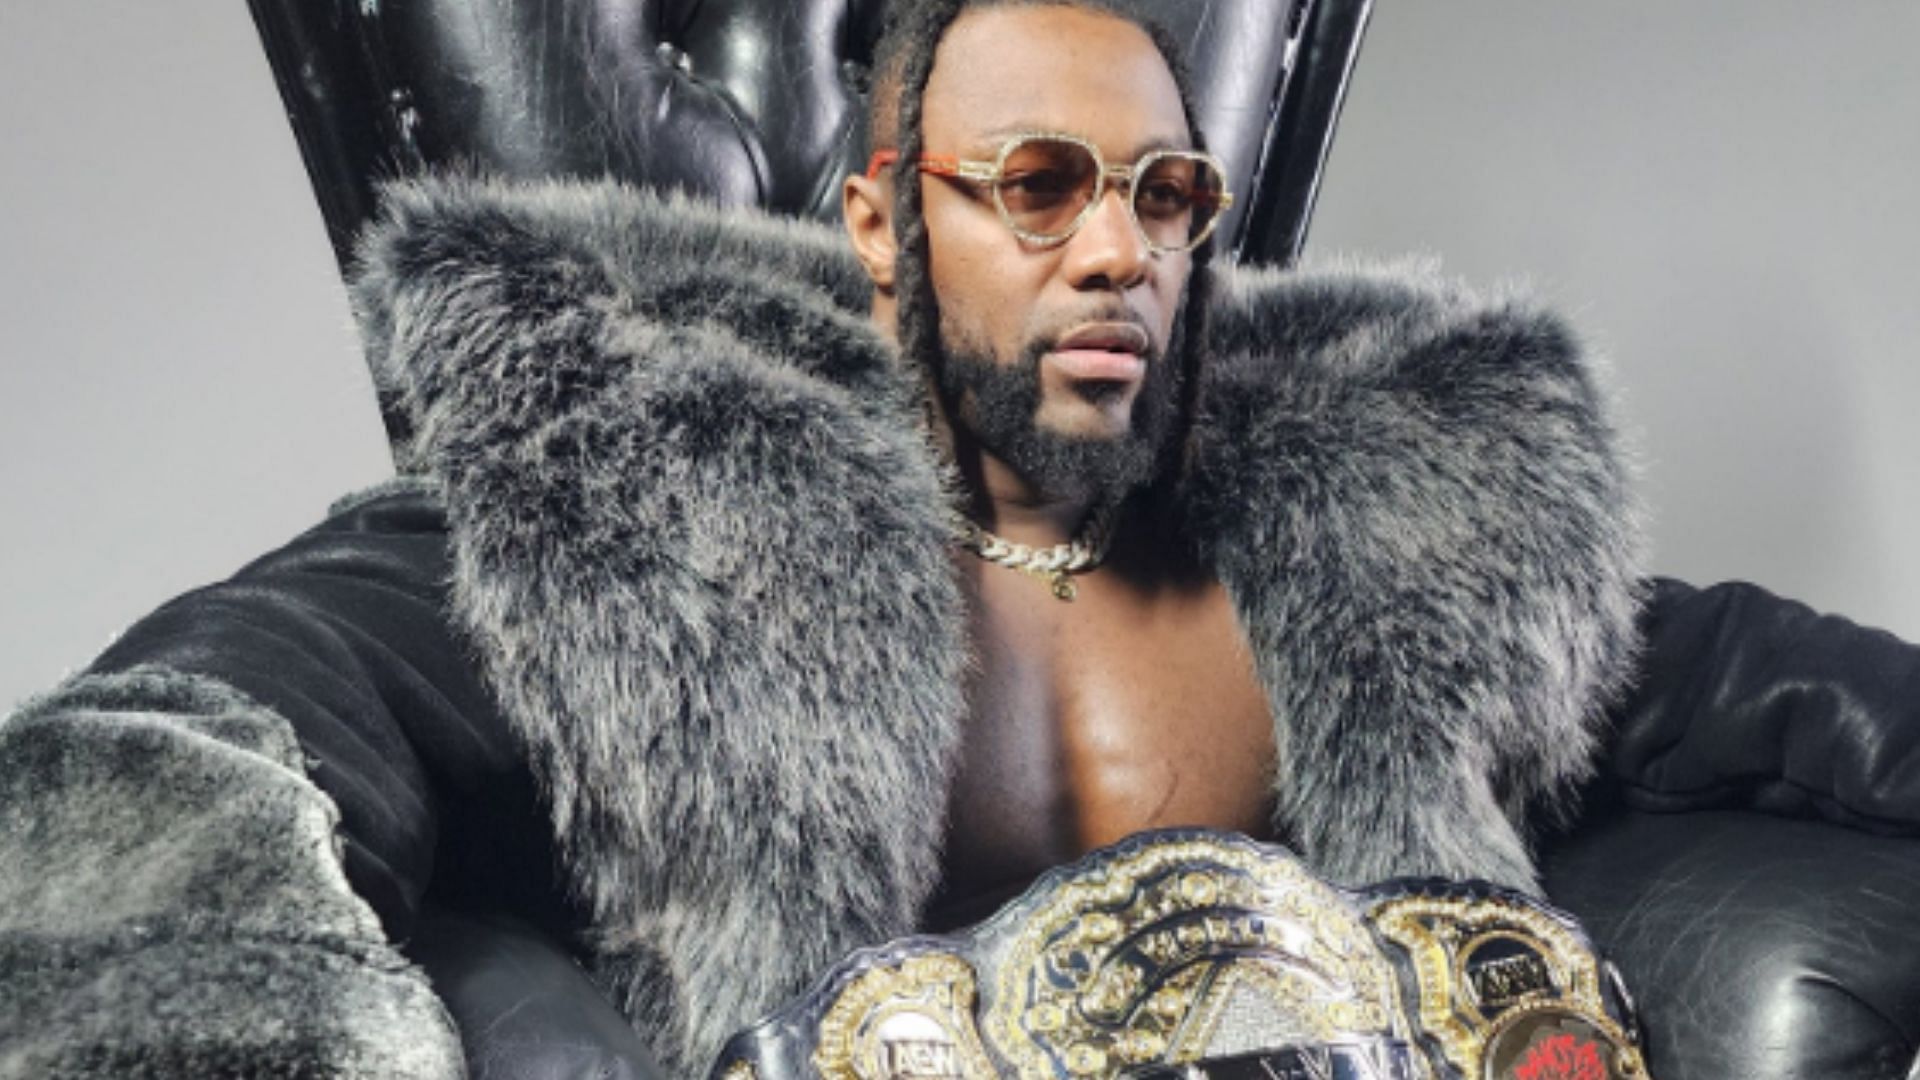 Swerve Strickland is the reigning AEW World Champion [Image Credits: Strickland